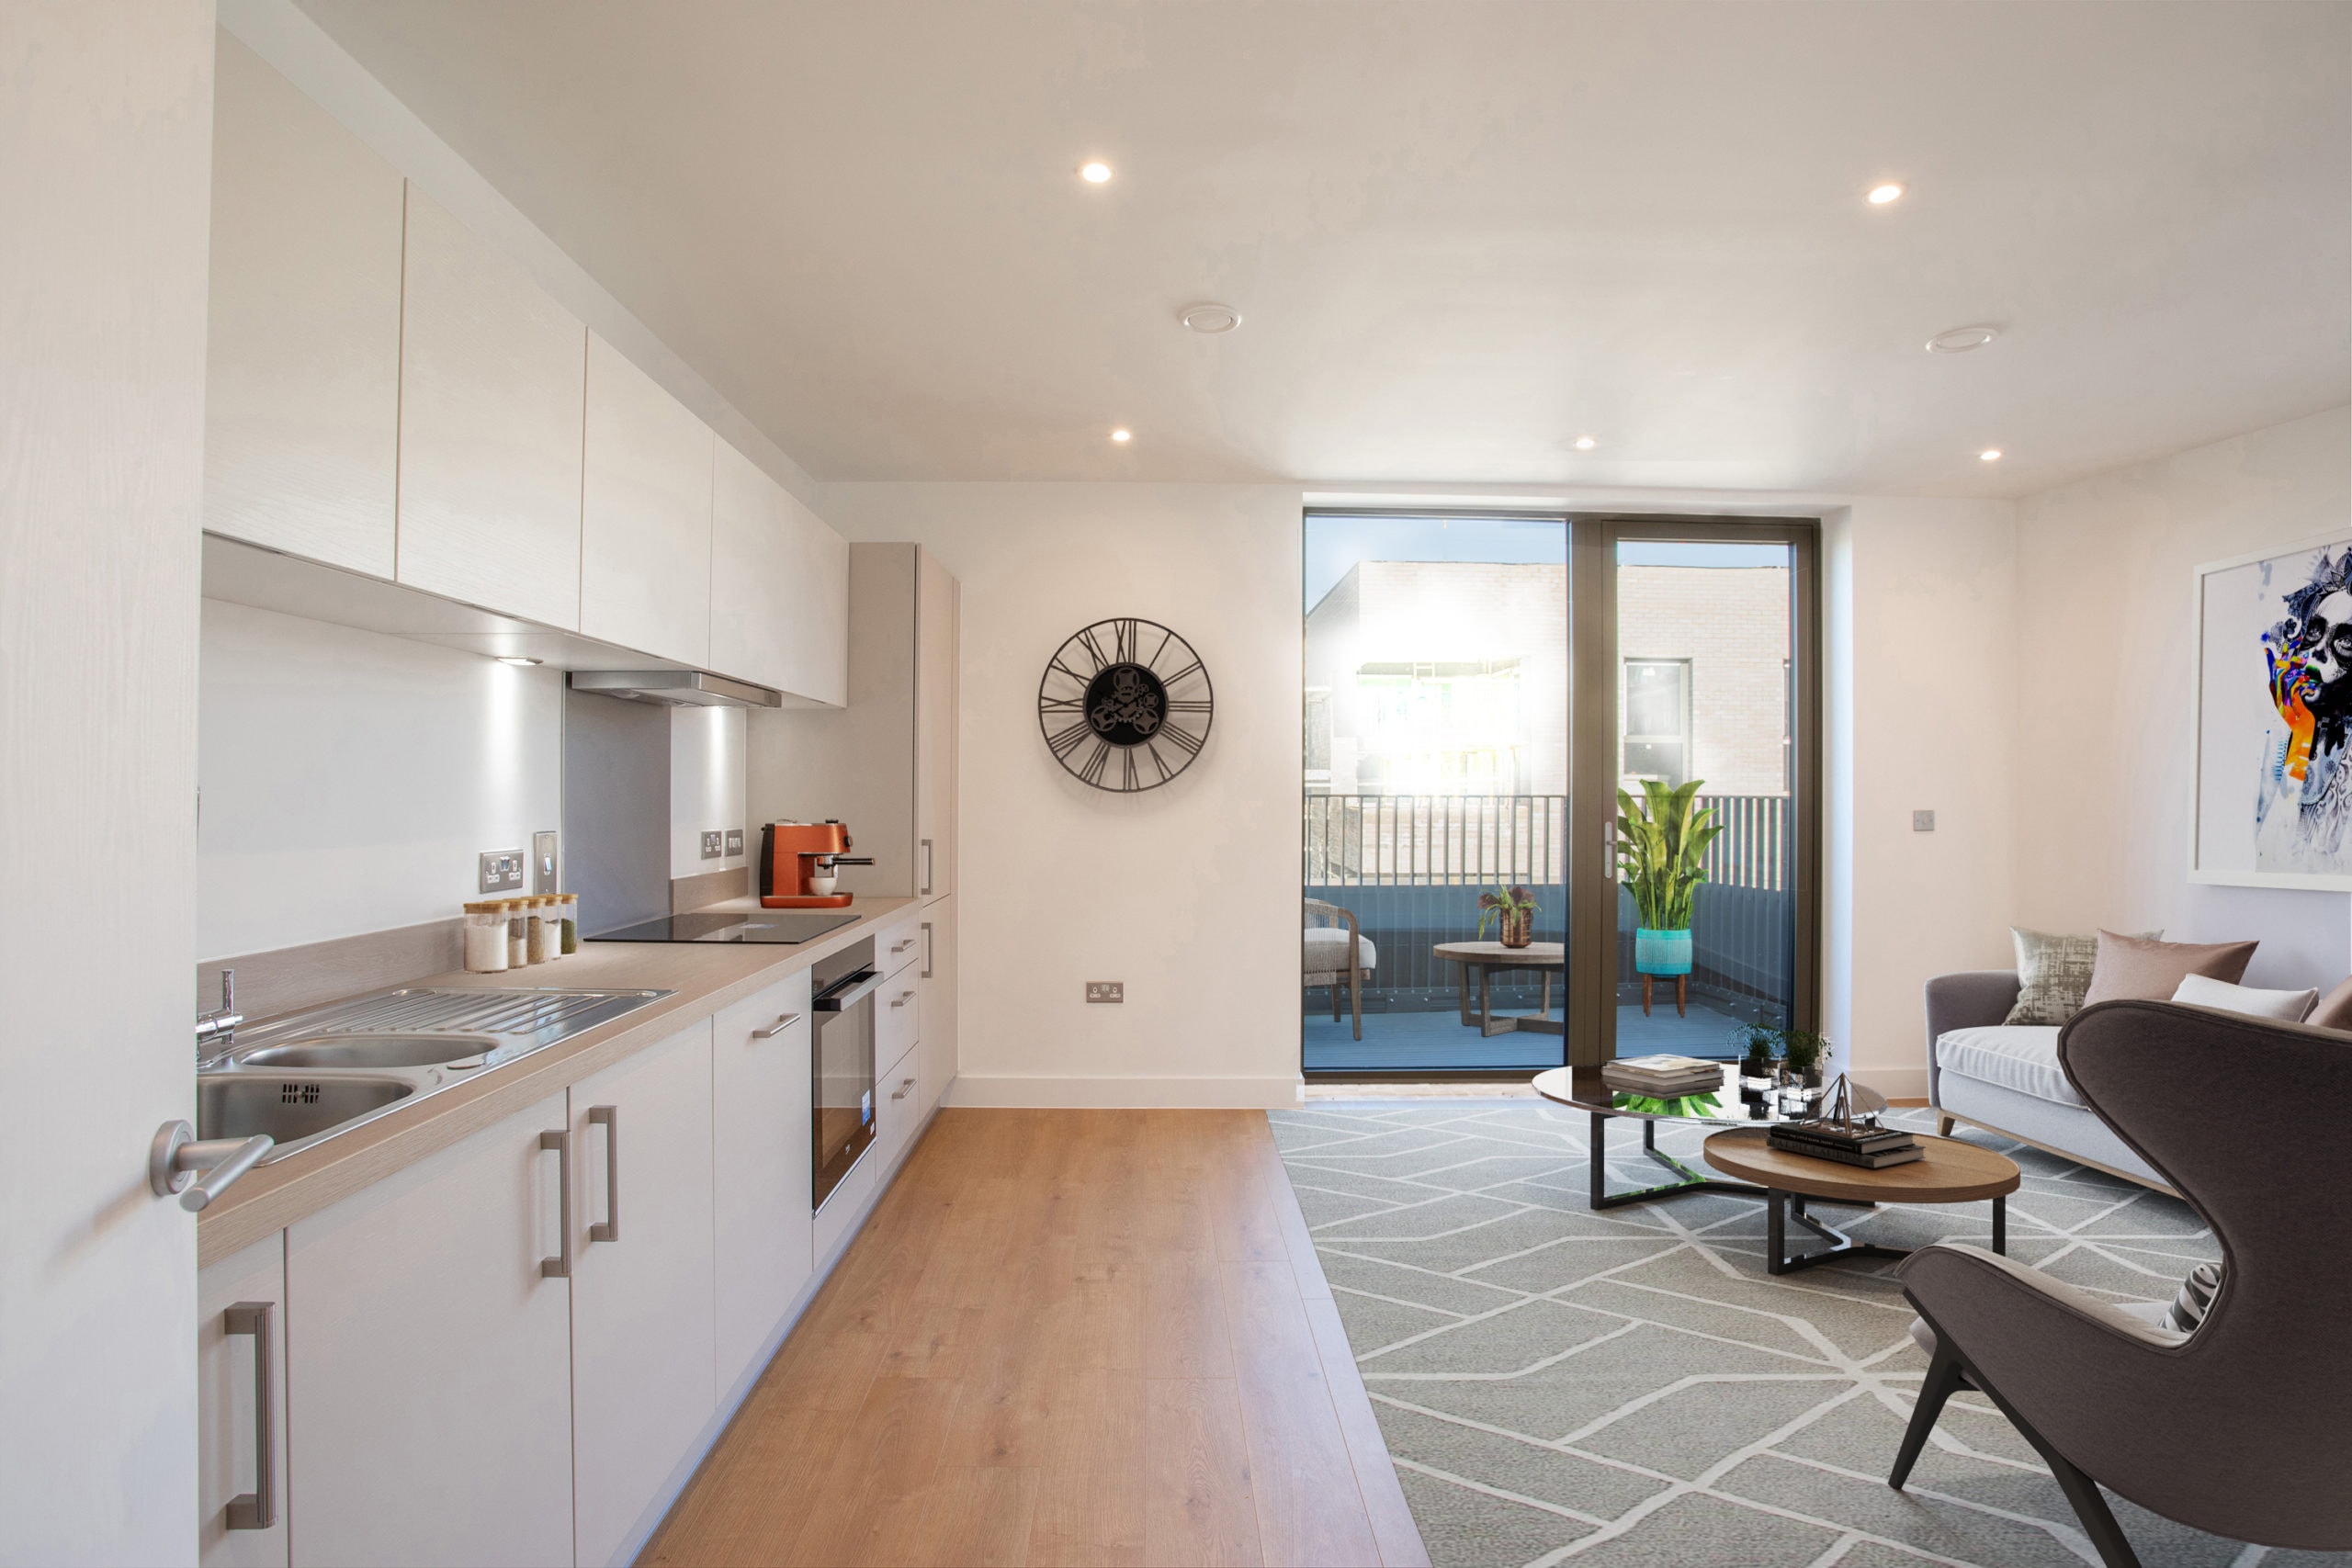 Internal photography of L&Q’s Lock No 19 - Shared Ownership homes available on Share to Buy